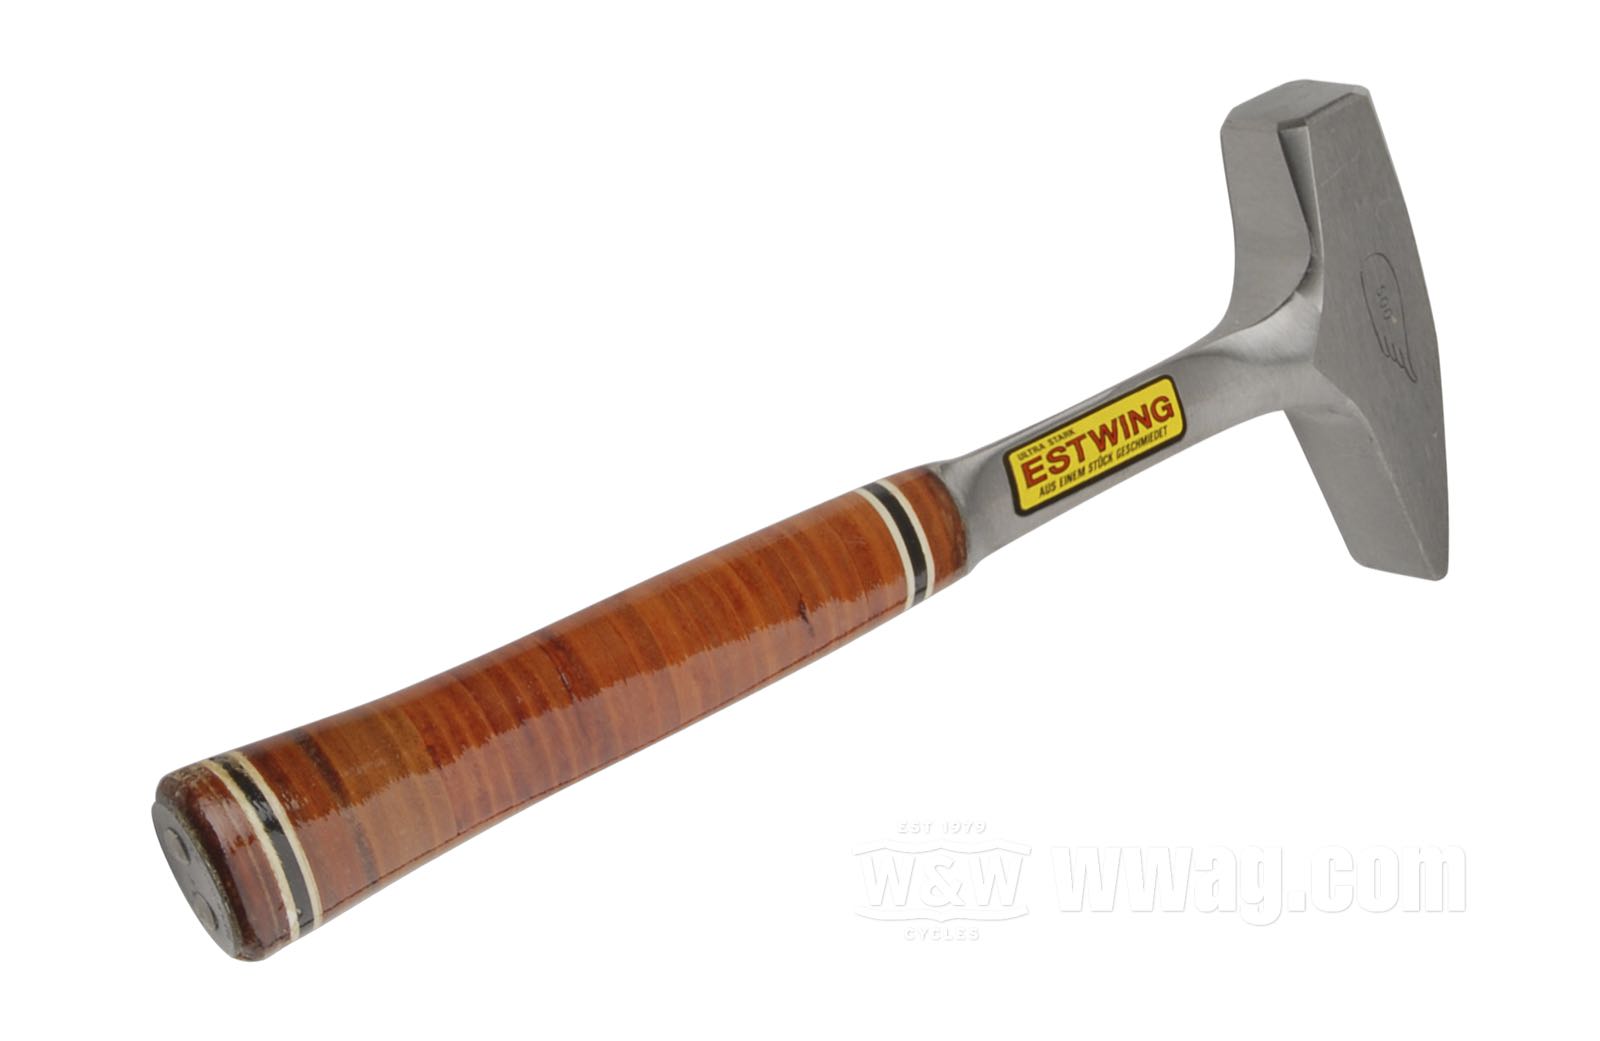 W&W Cycles - Estwing Hammers for Harley-Davidson